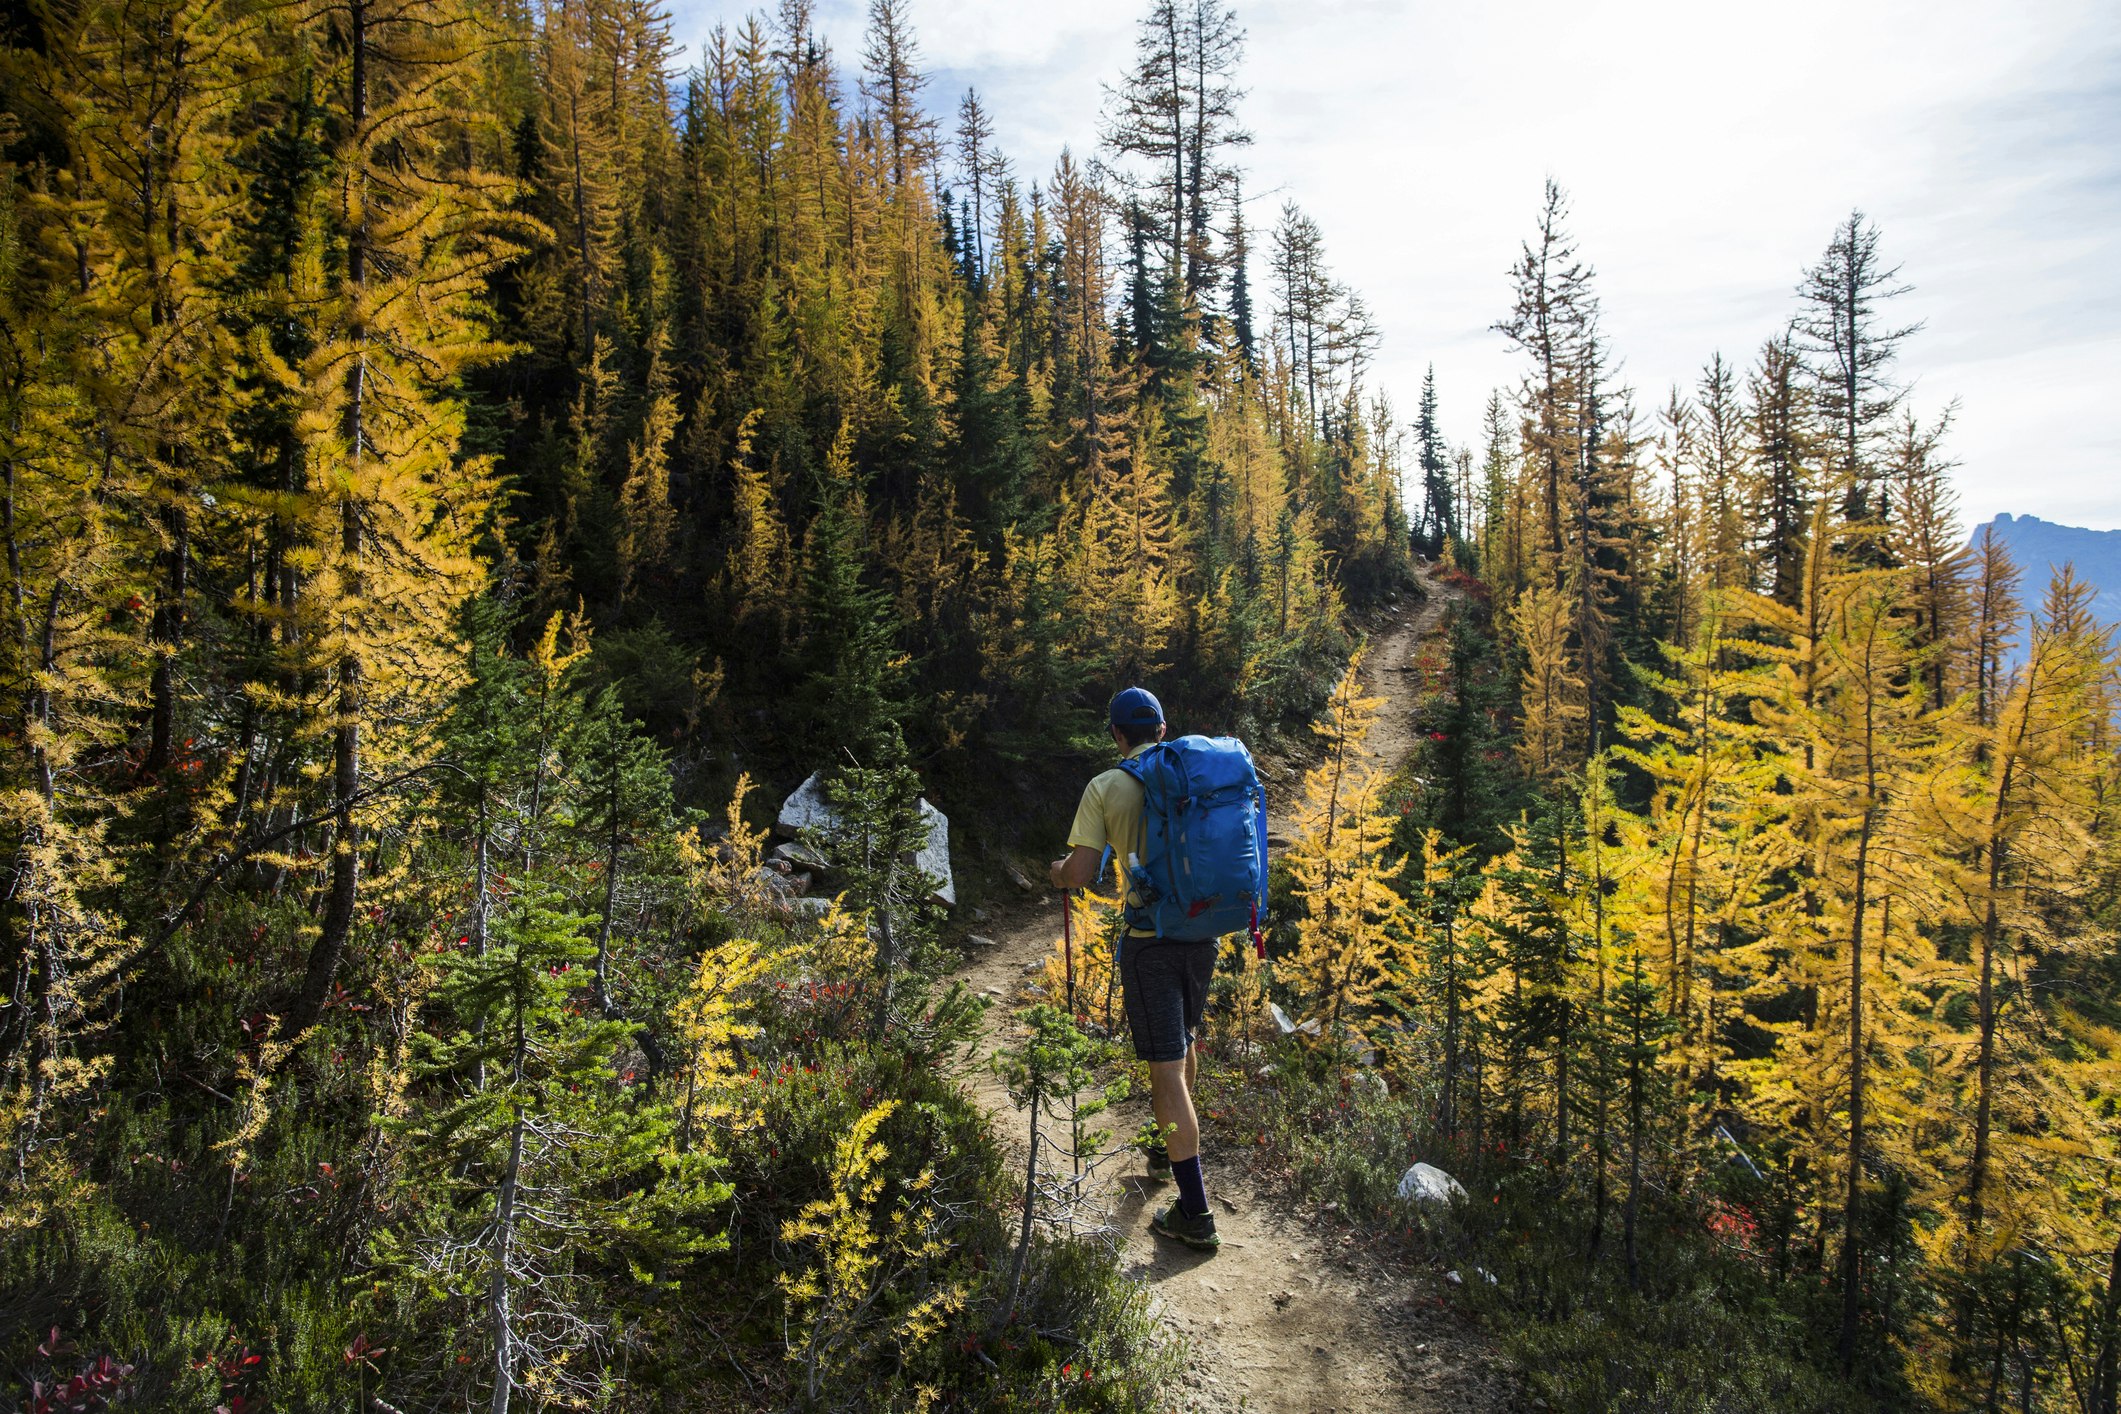 A young man hikes through the colorful larch trees in the Pasayten Wilderness on the Pacific Crest Trail (PCT) in Washington